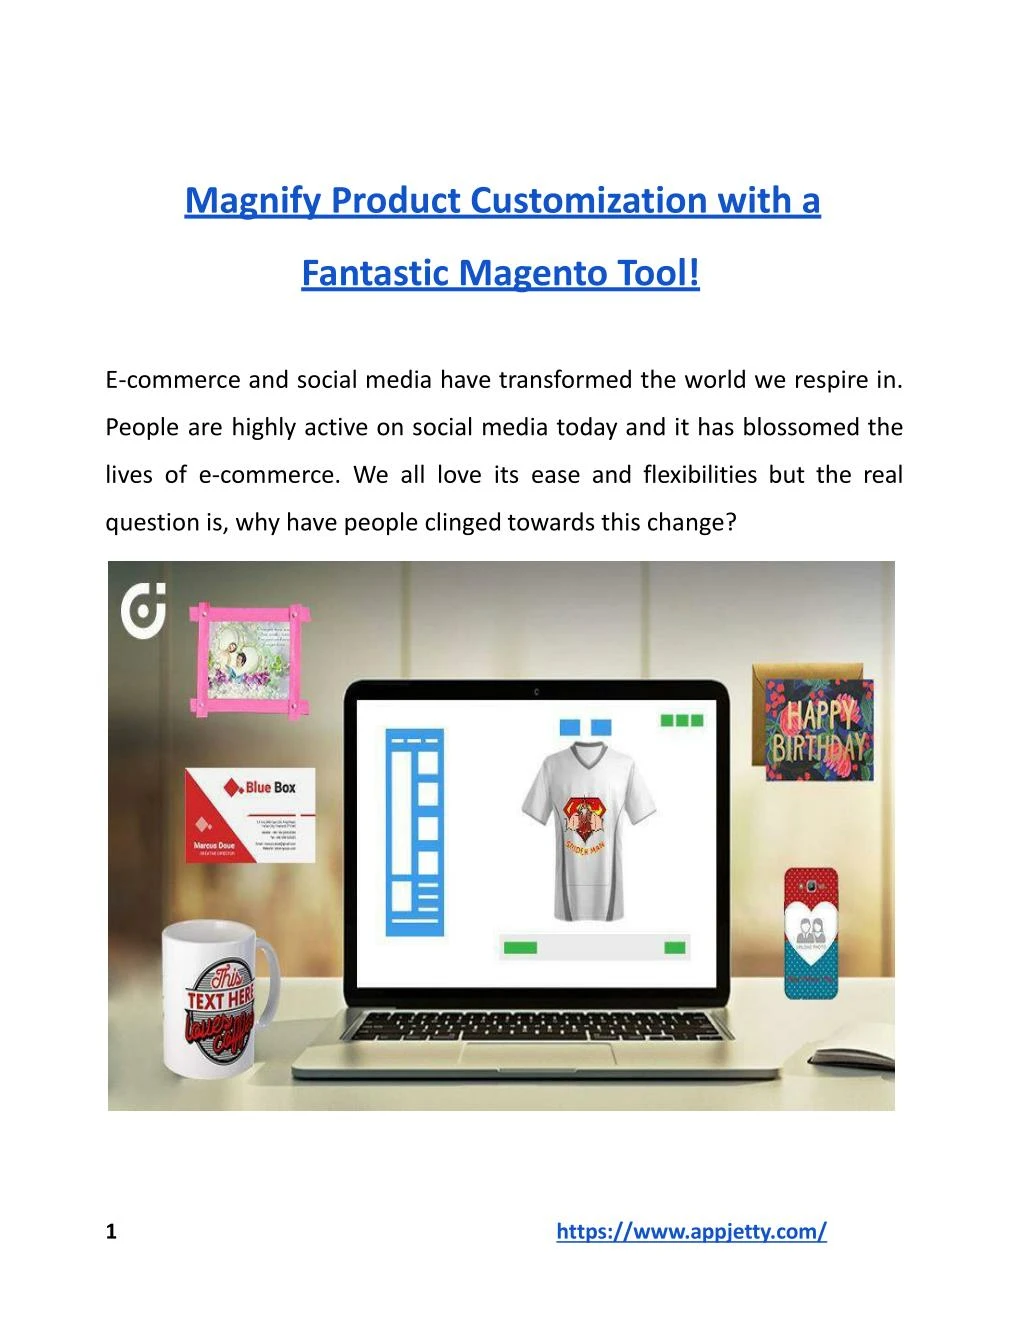 magnify product customization with a fantastic